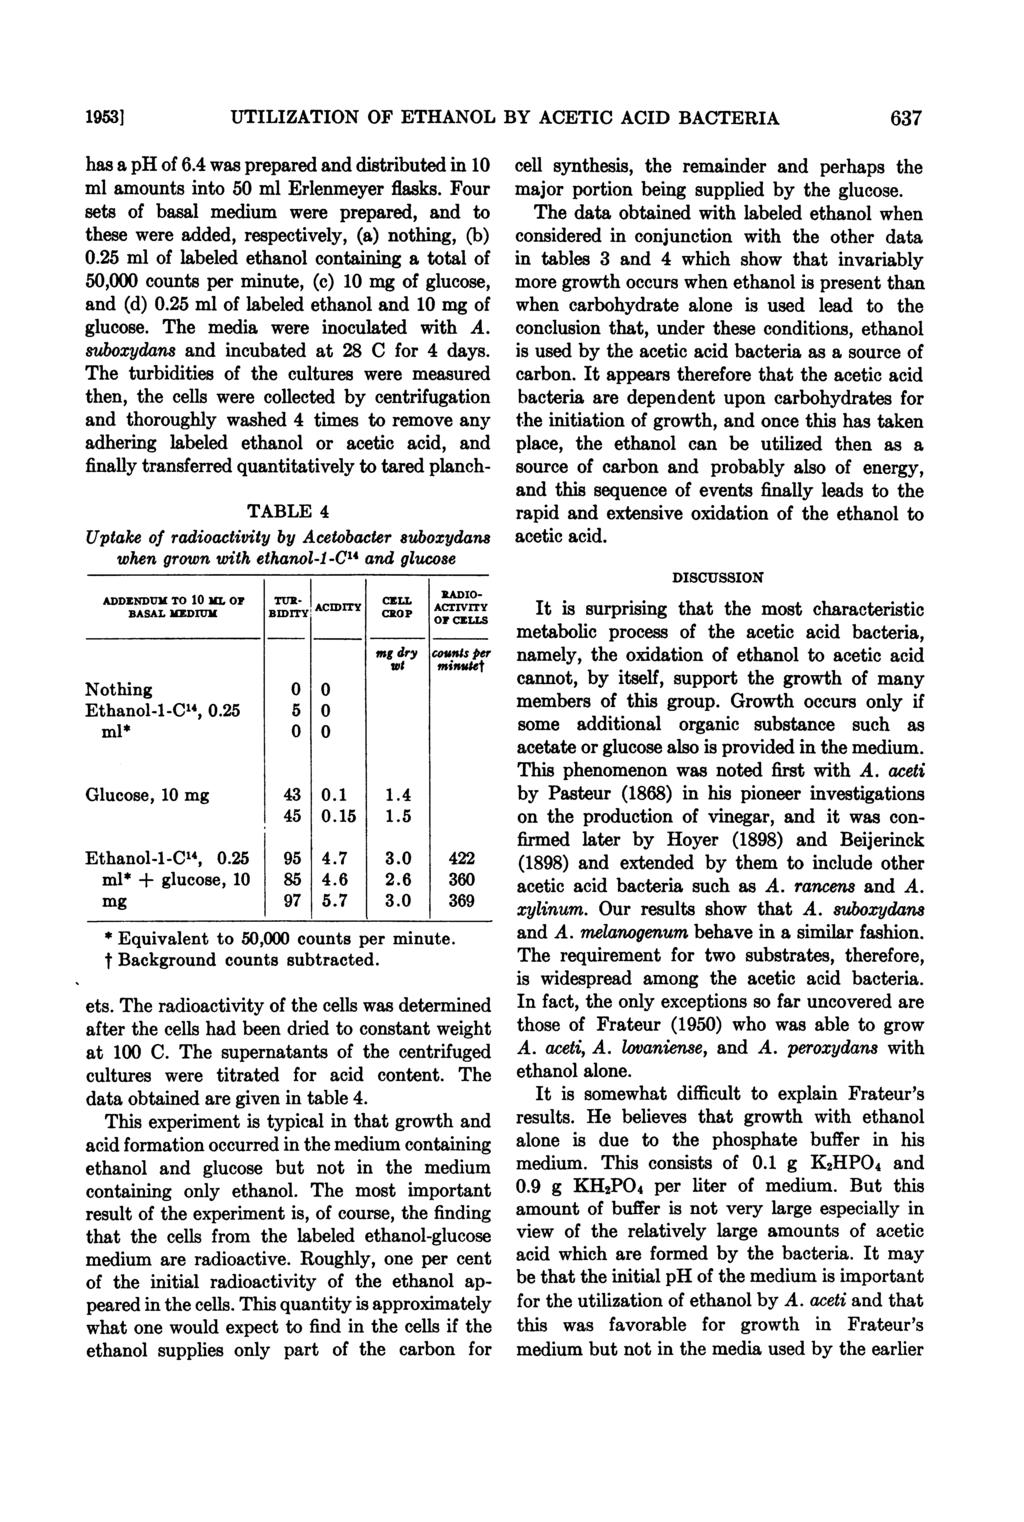 19531 UTILIZATION OF ETHANOL BY ACETIC ACID BACTERIA 637 has a ph of 6.4 was prepared and distributed in 10 ml amounts into 50 ml Erlenmeyer flasks.